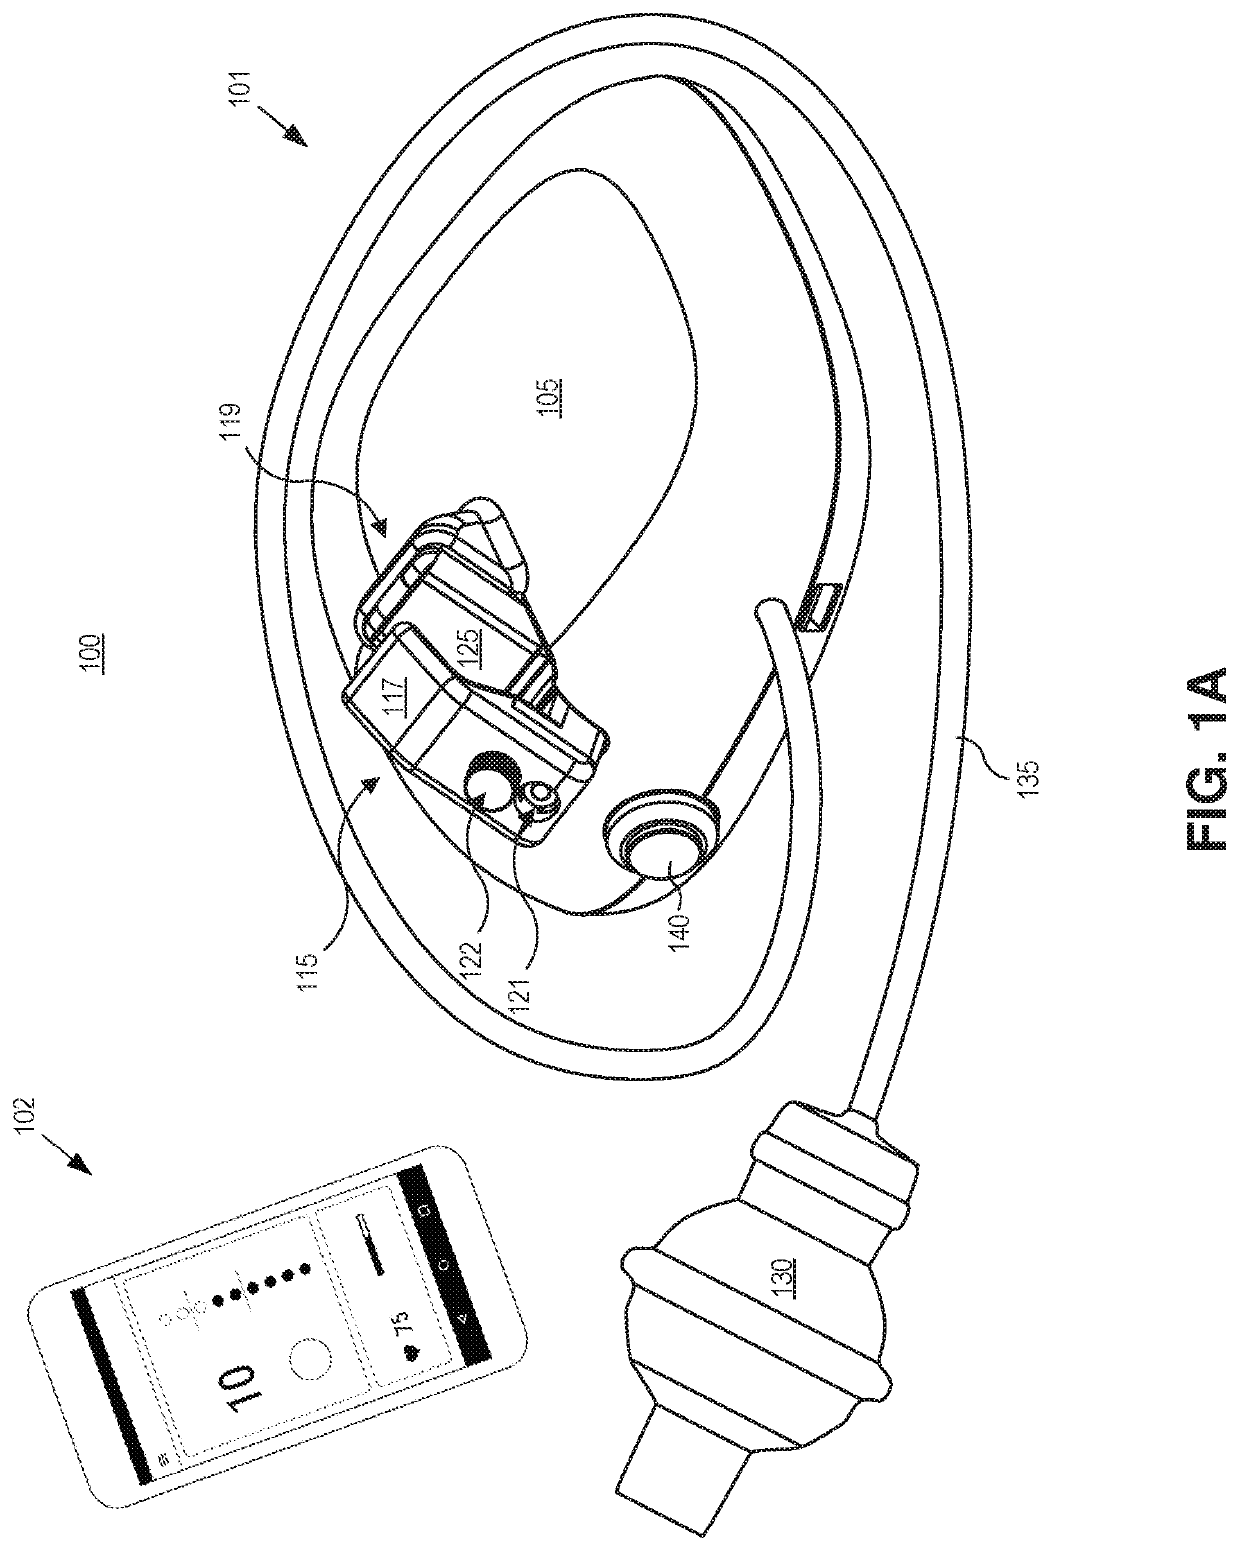 Apparatus for noninvasive measurement of a heart performance metric